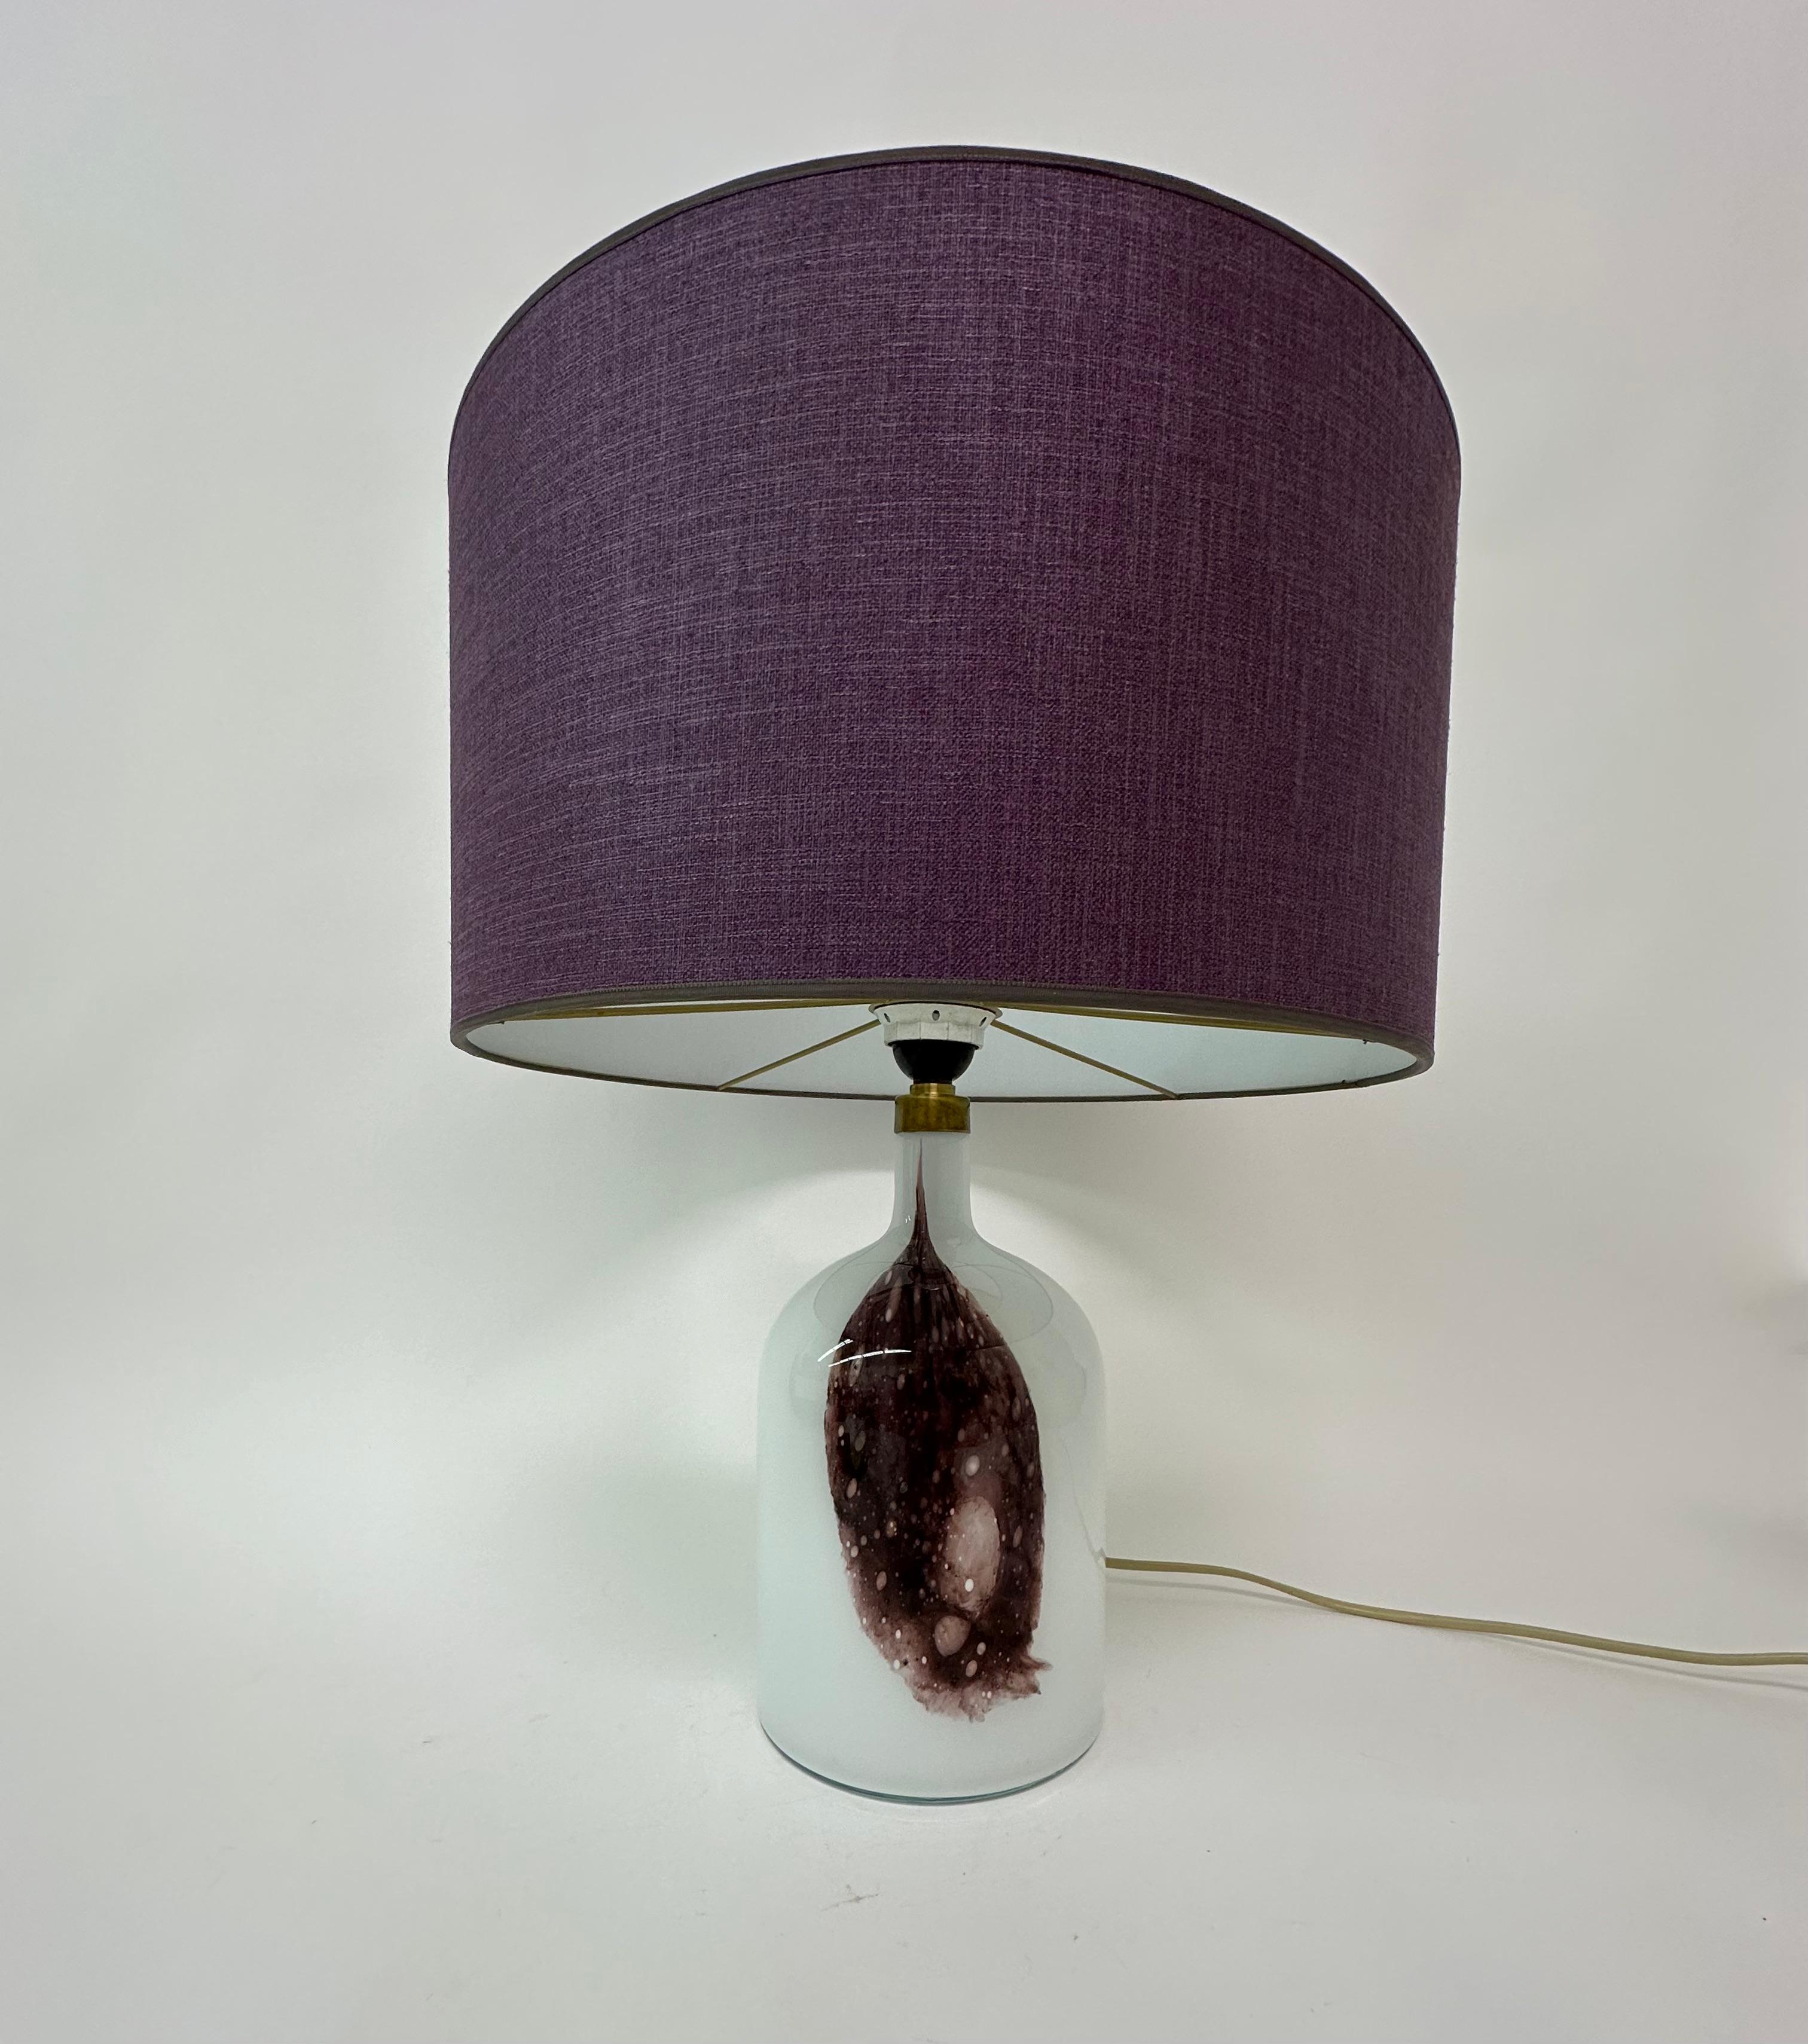 Holmegaard Symmetrisk glass table lamp by Michael Bang , 1970’s Denmark

Dimensions: 48,5cm H, 40cm Diameter
Condition: Good
Material: Glass , fabric
Color: Purple, White